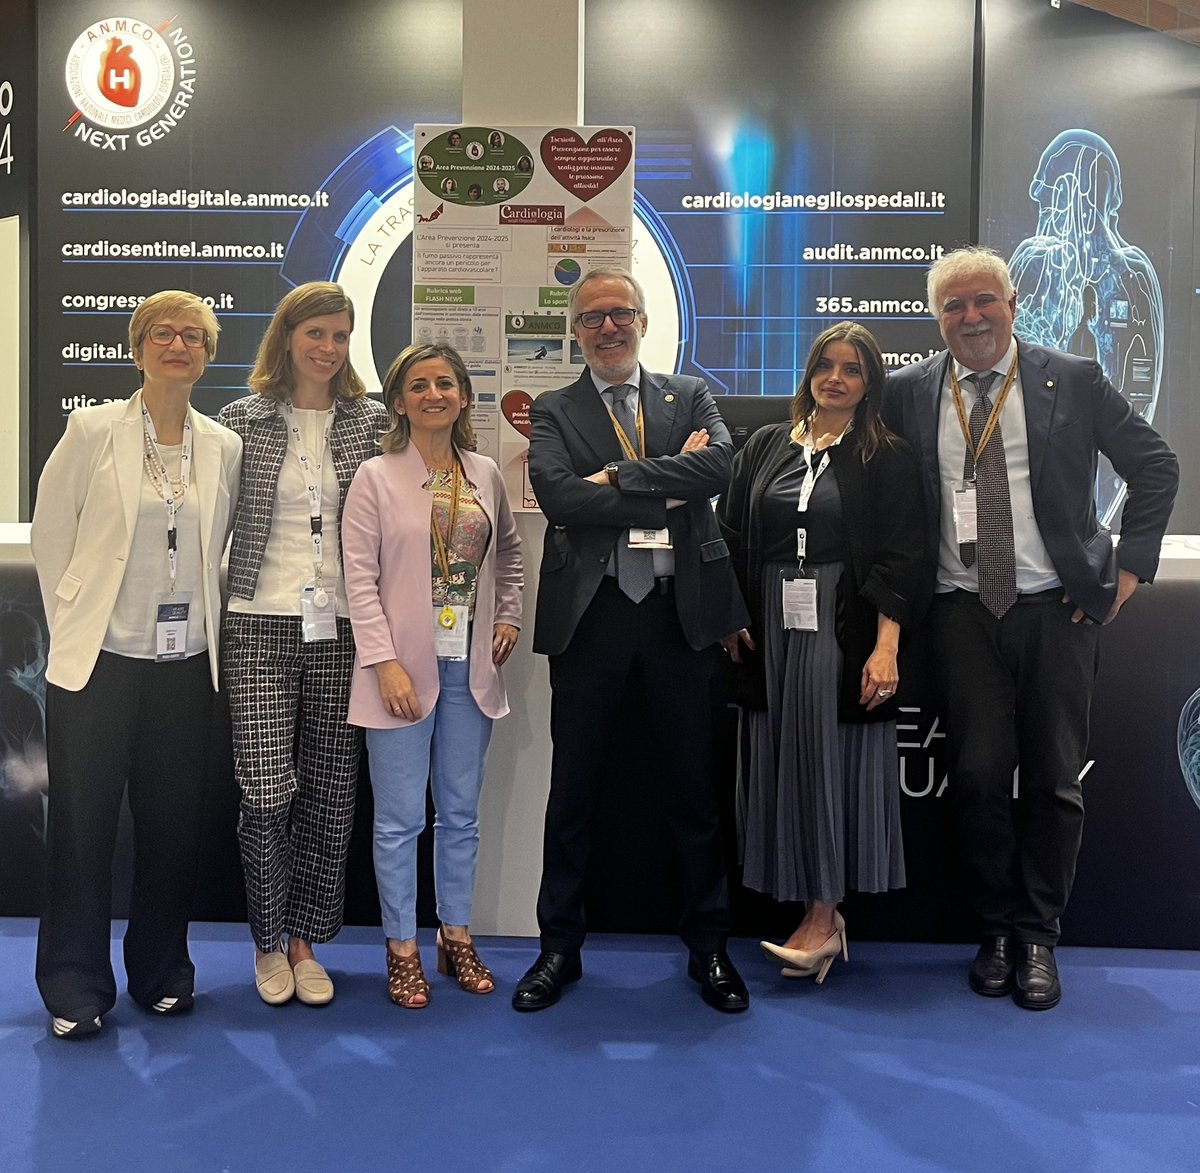 ✨#ANMCO24 memories… CVD #Prevention Area presents its activities with Prof #Colivicchi, past President @_anmco, and @CarmineRiccio6, the referent for Area activities, both chairs of our Area in the past… flattered to be in the footsteps of a distinguished 💡history